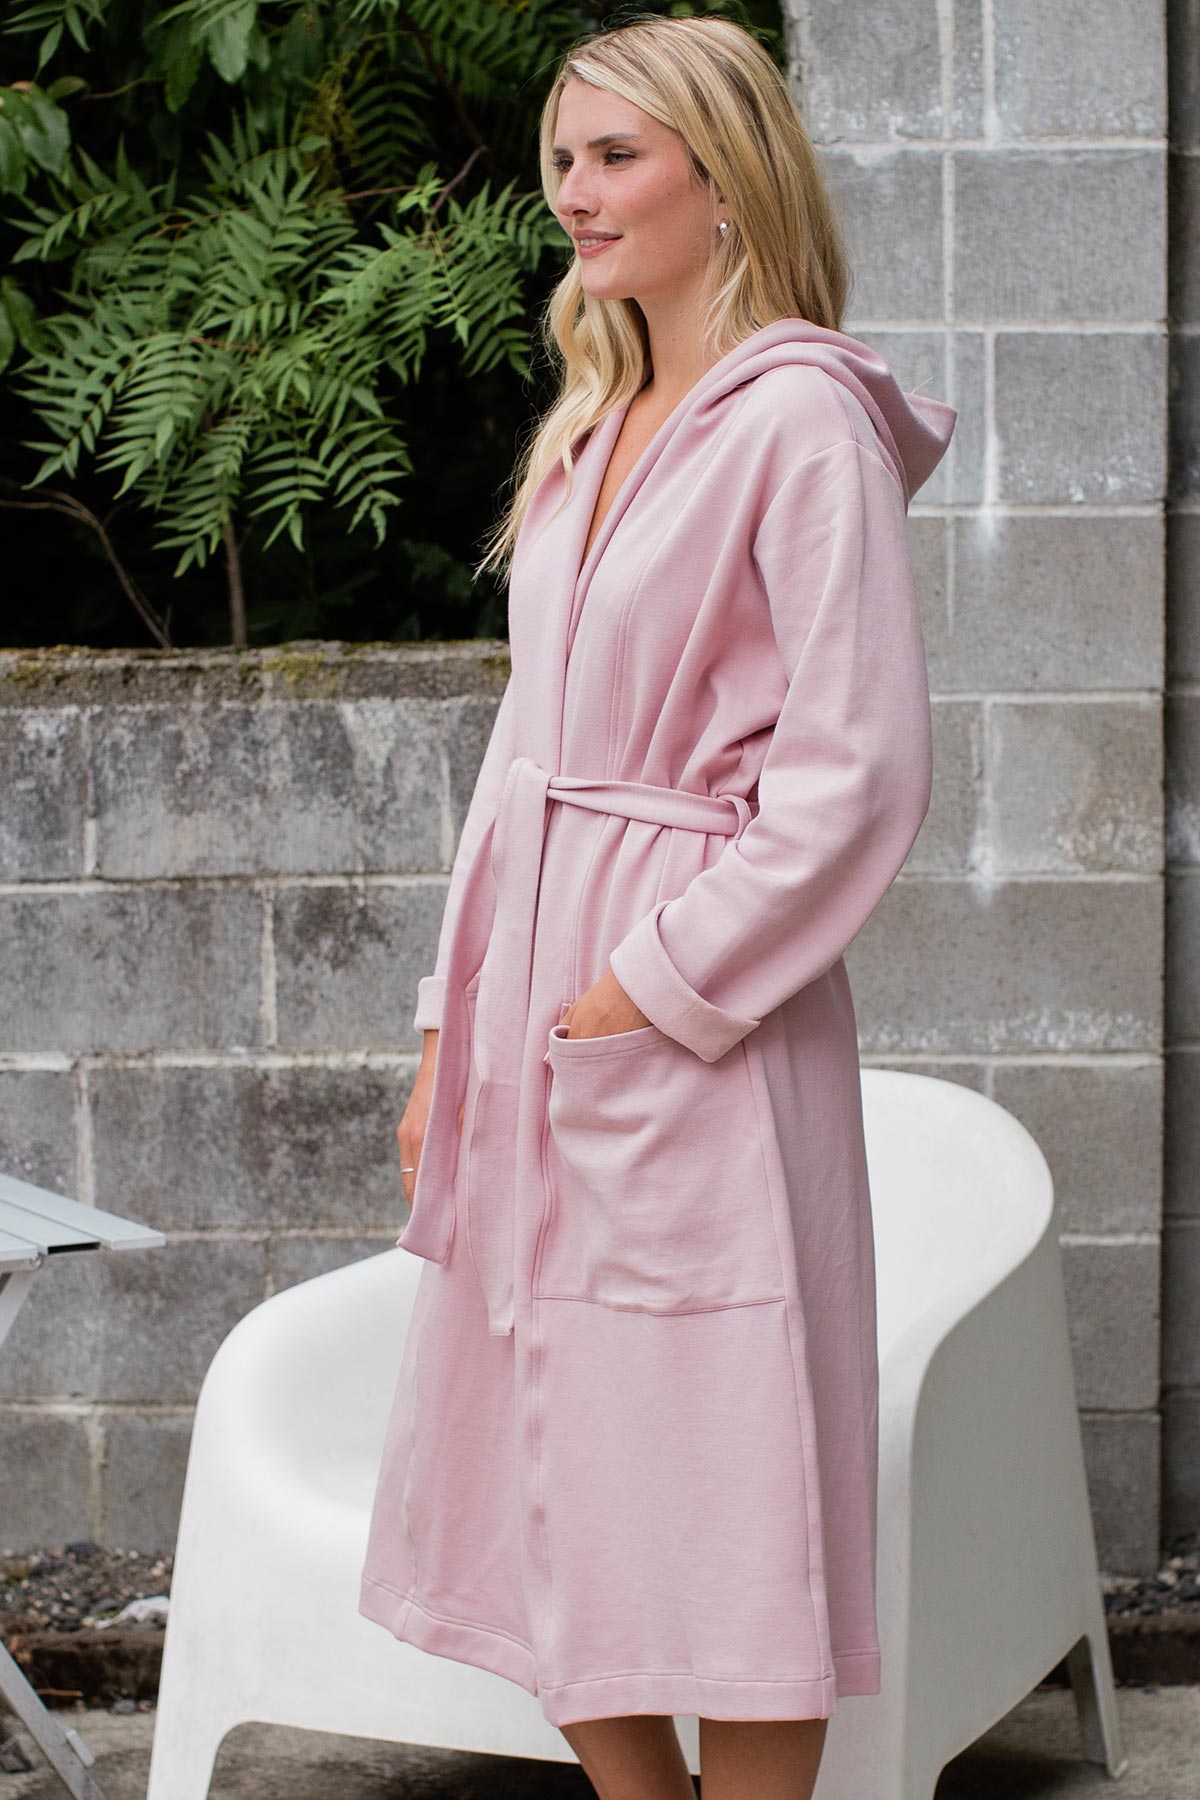 A woman standing facing to the side with one hand in her robe pocket, wearing Yala Elliot Bamboo and Organic Cotton Sweatshirt Hooded Robe in Lotus Pink